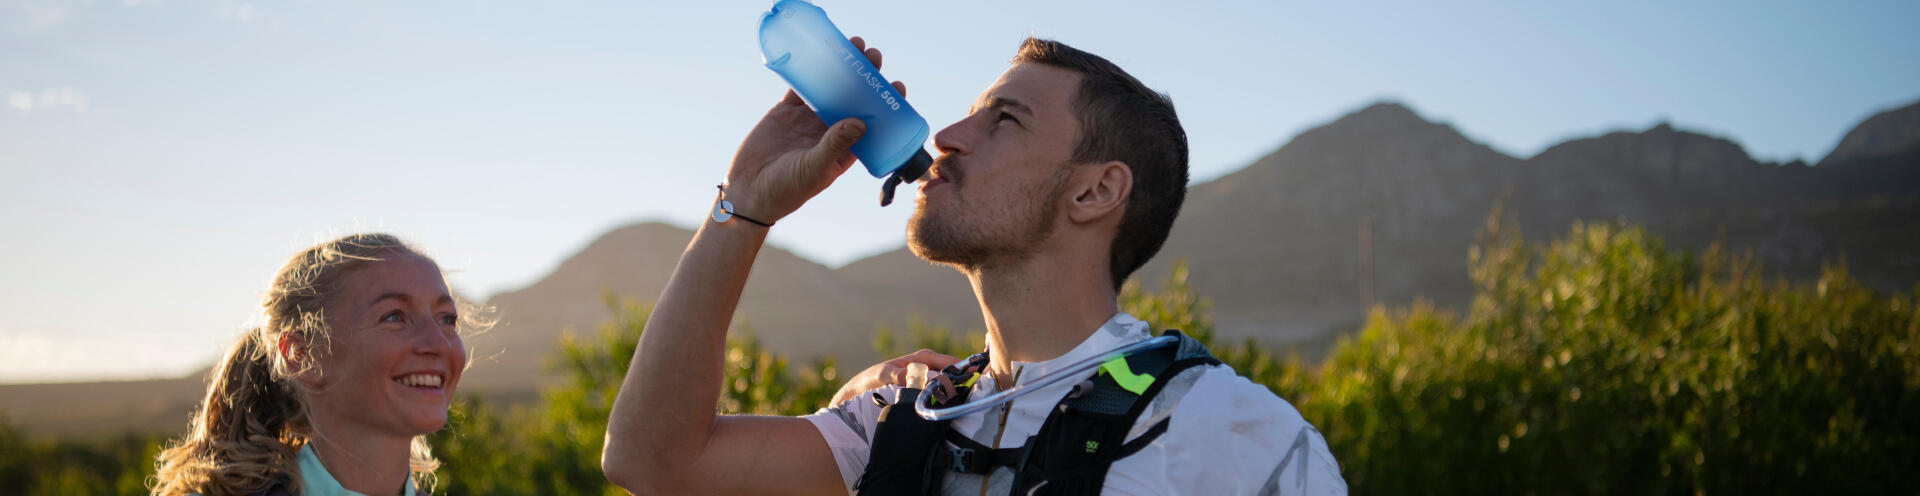 RUNNING | 4 Tips to Stay Hydrated While Running